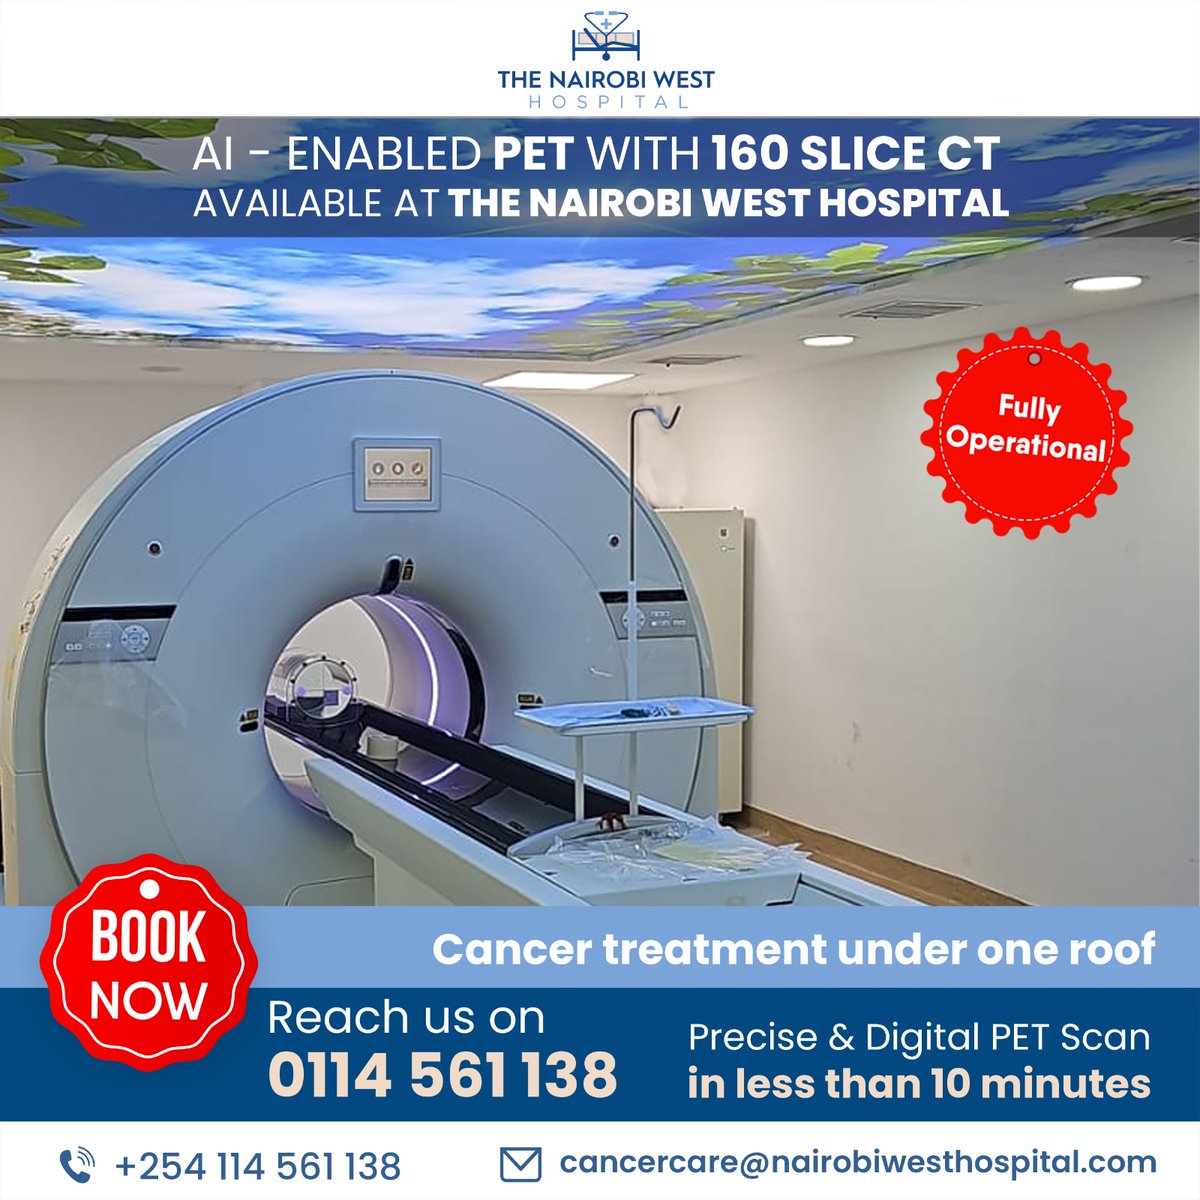 We have unveiled advanced AI-enabled PET/CT imaging technology, becoming the 3rd facility in the region to do so. Digital PET/CT scan, utilizing artificial intelligence, enhances the diagnosis &treatment of cancer, neurological disorders, heart conditions, & other diseases../1